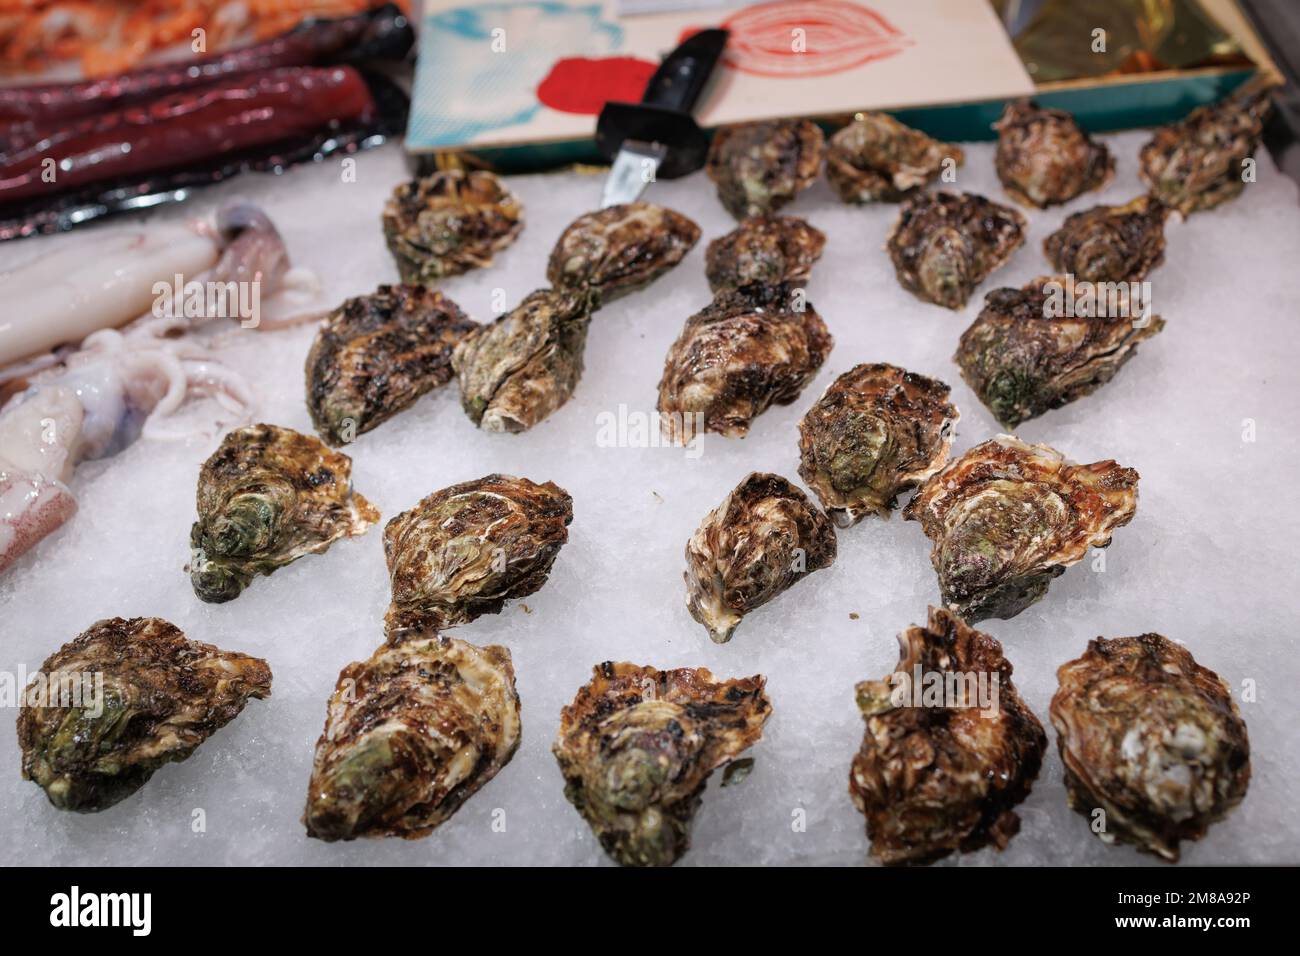 Valuable Newly caught and Fresh Oysters displayed on a Market Stall. Stock Photo